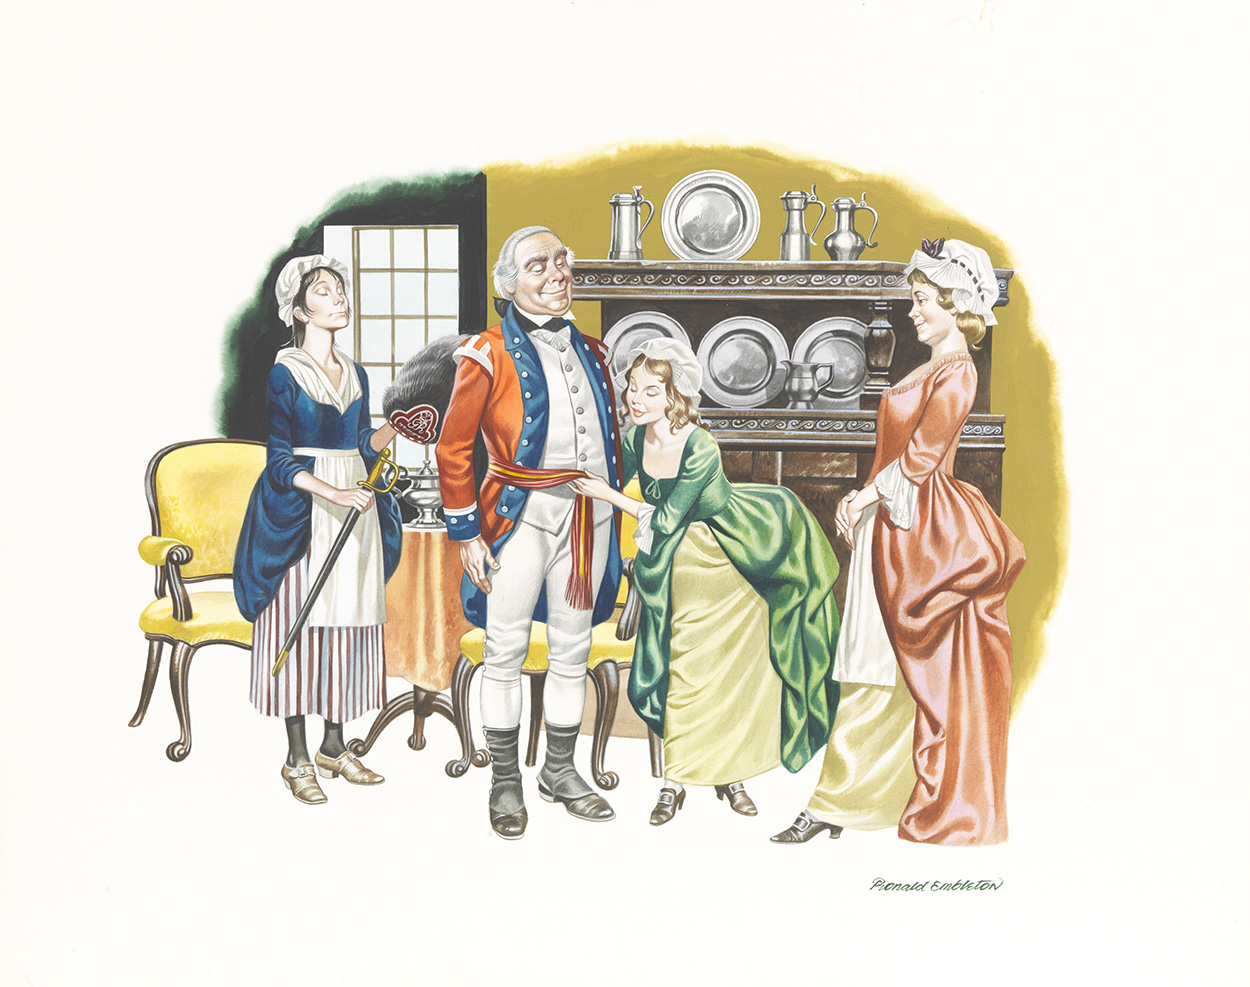 Barnaby Rudge: What Finery (Original) (Signed) art by Charles Dickens (Ron Embleton) at The Illustration Art Gallery